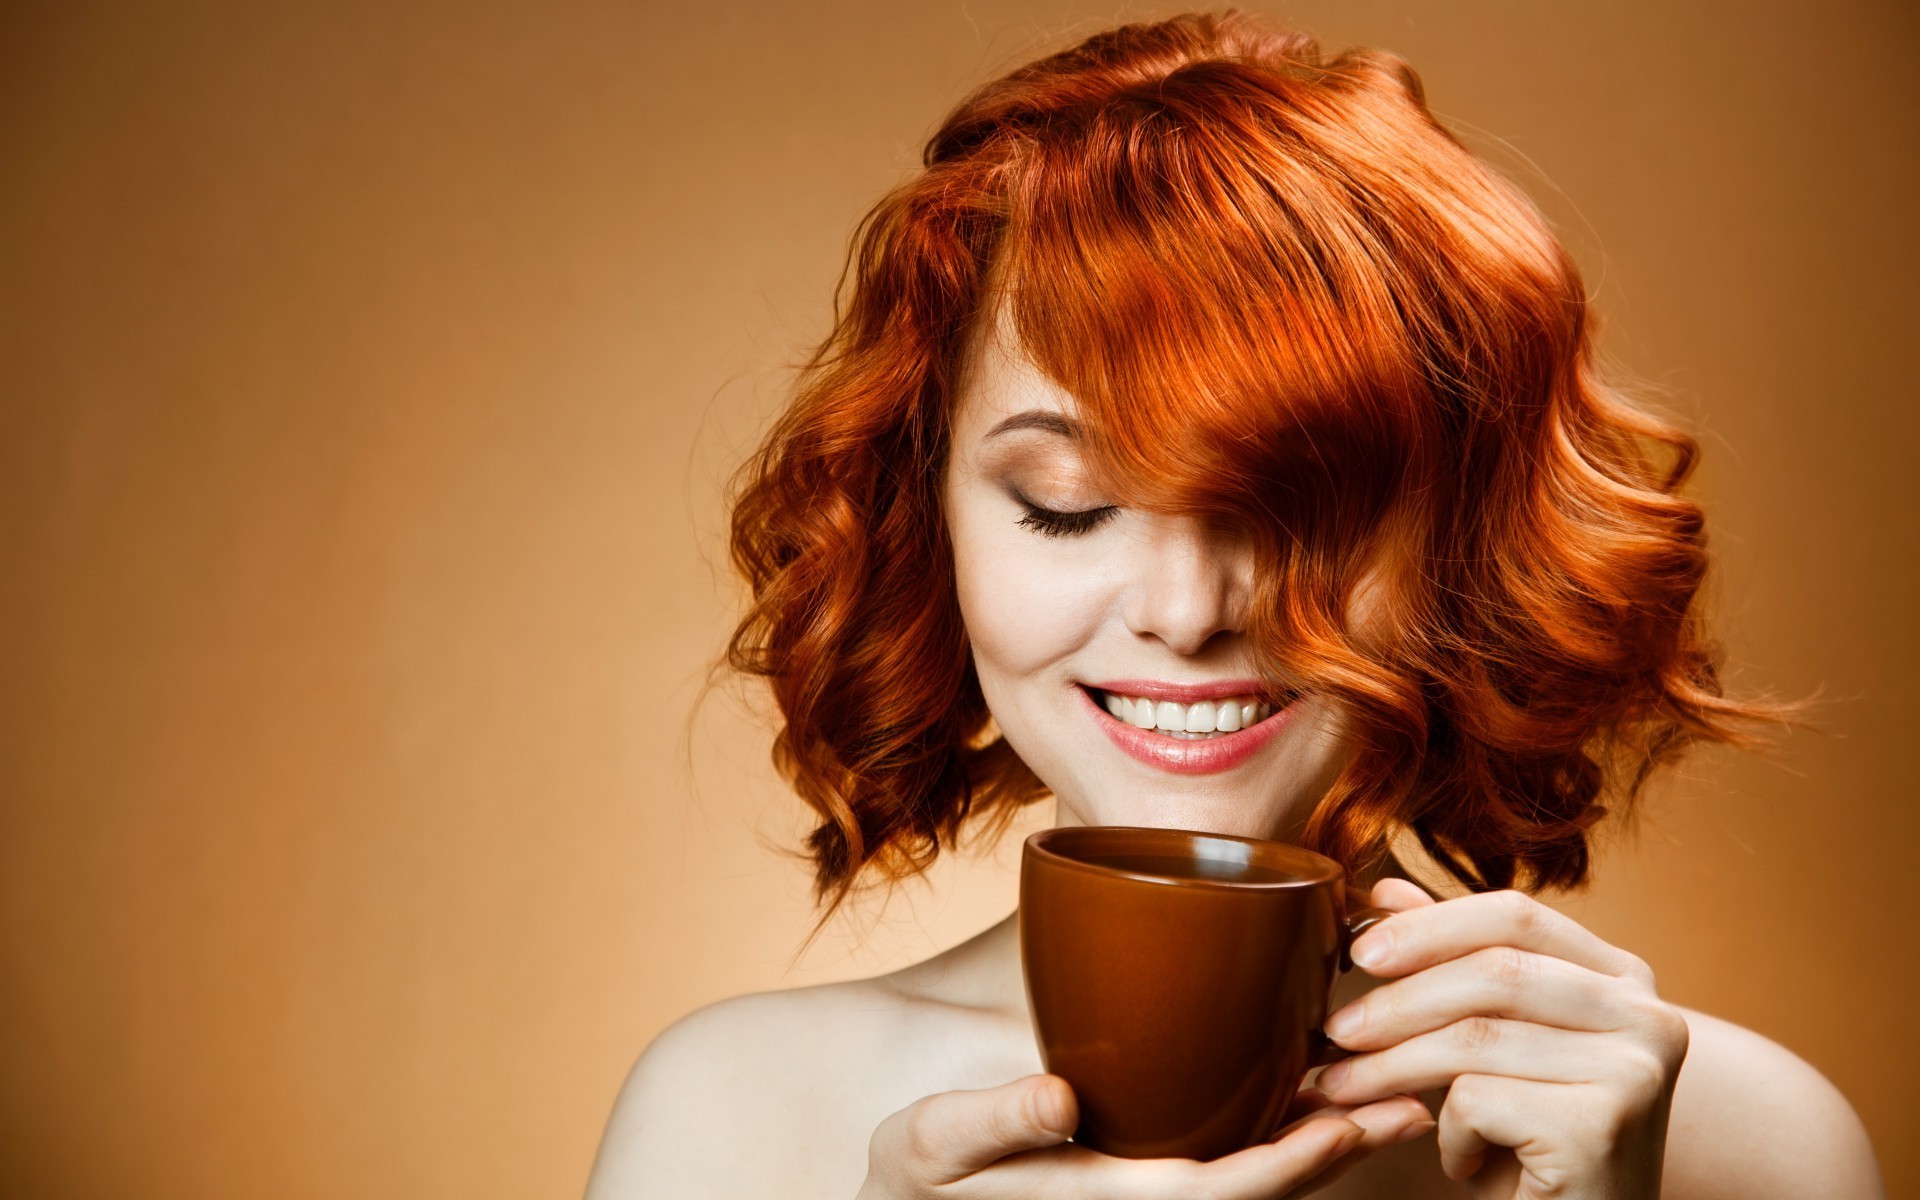 women, Redhead, Curly Hair, Cup, Smiling Wallpaper